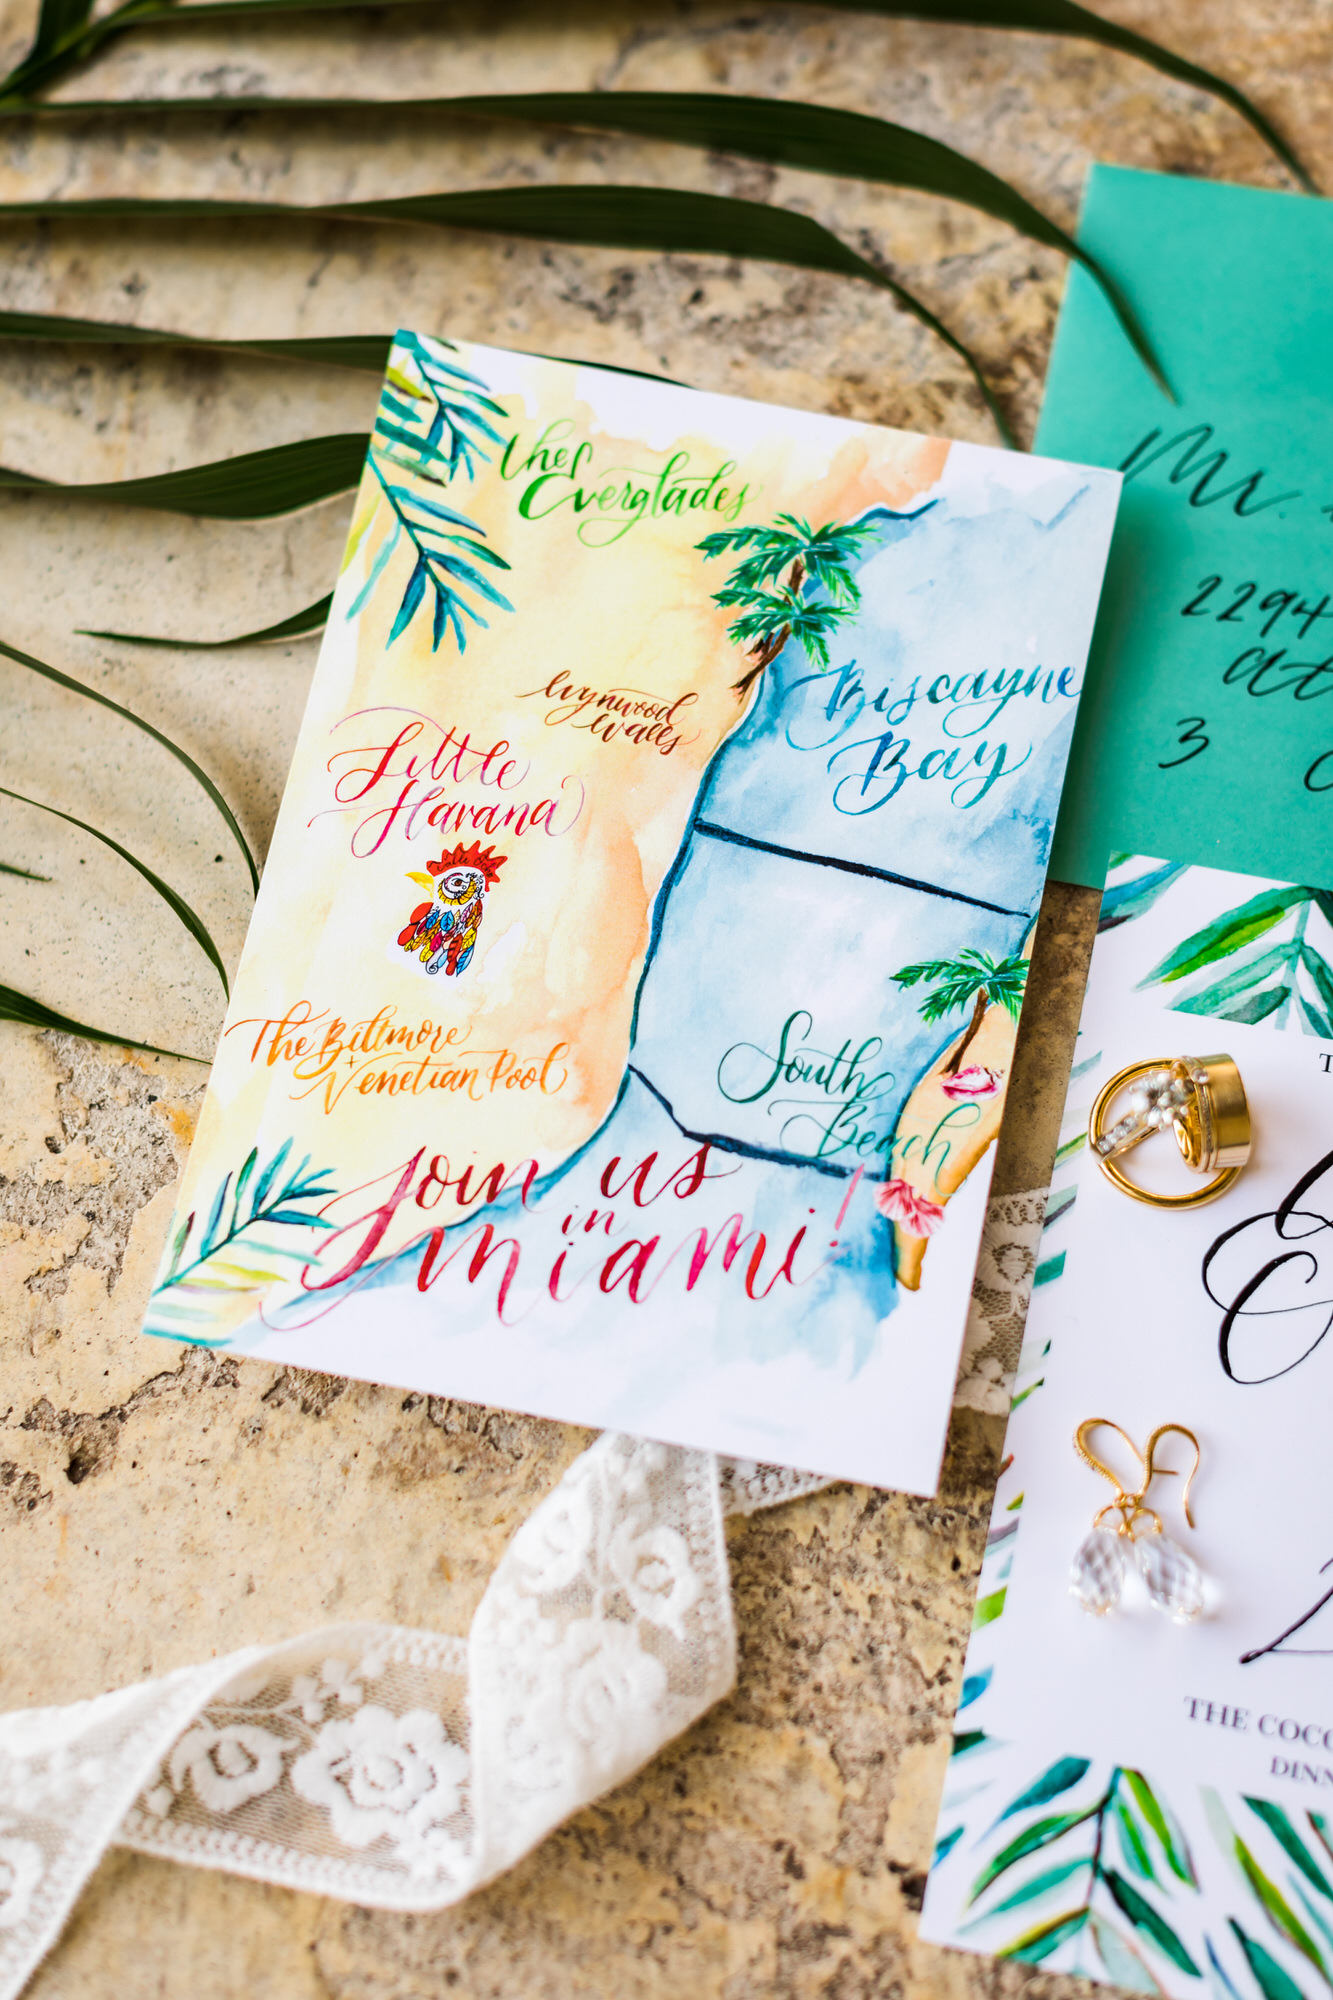 watercolored wedding invitations and wedding details of cuban wedding